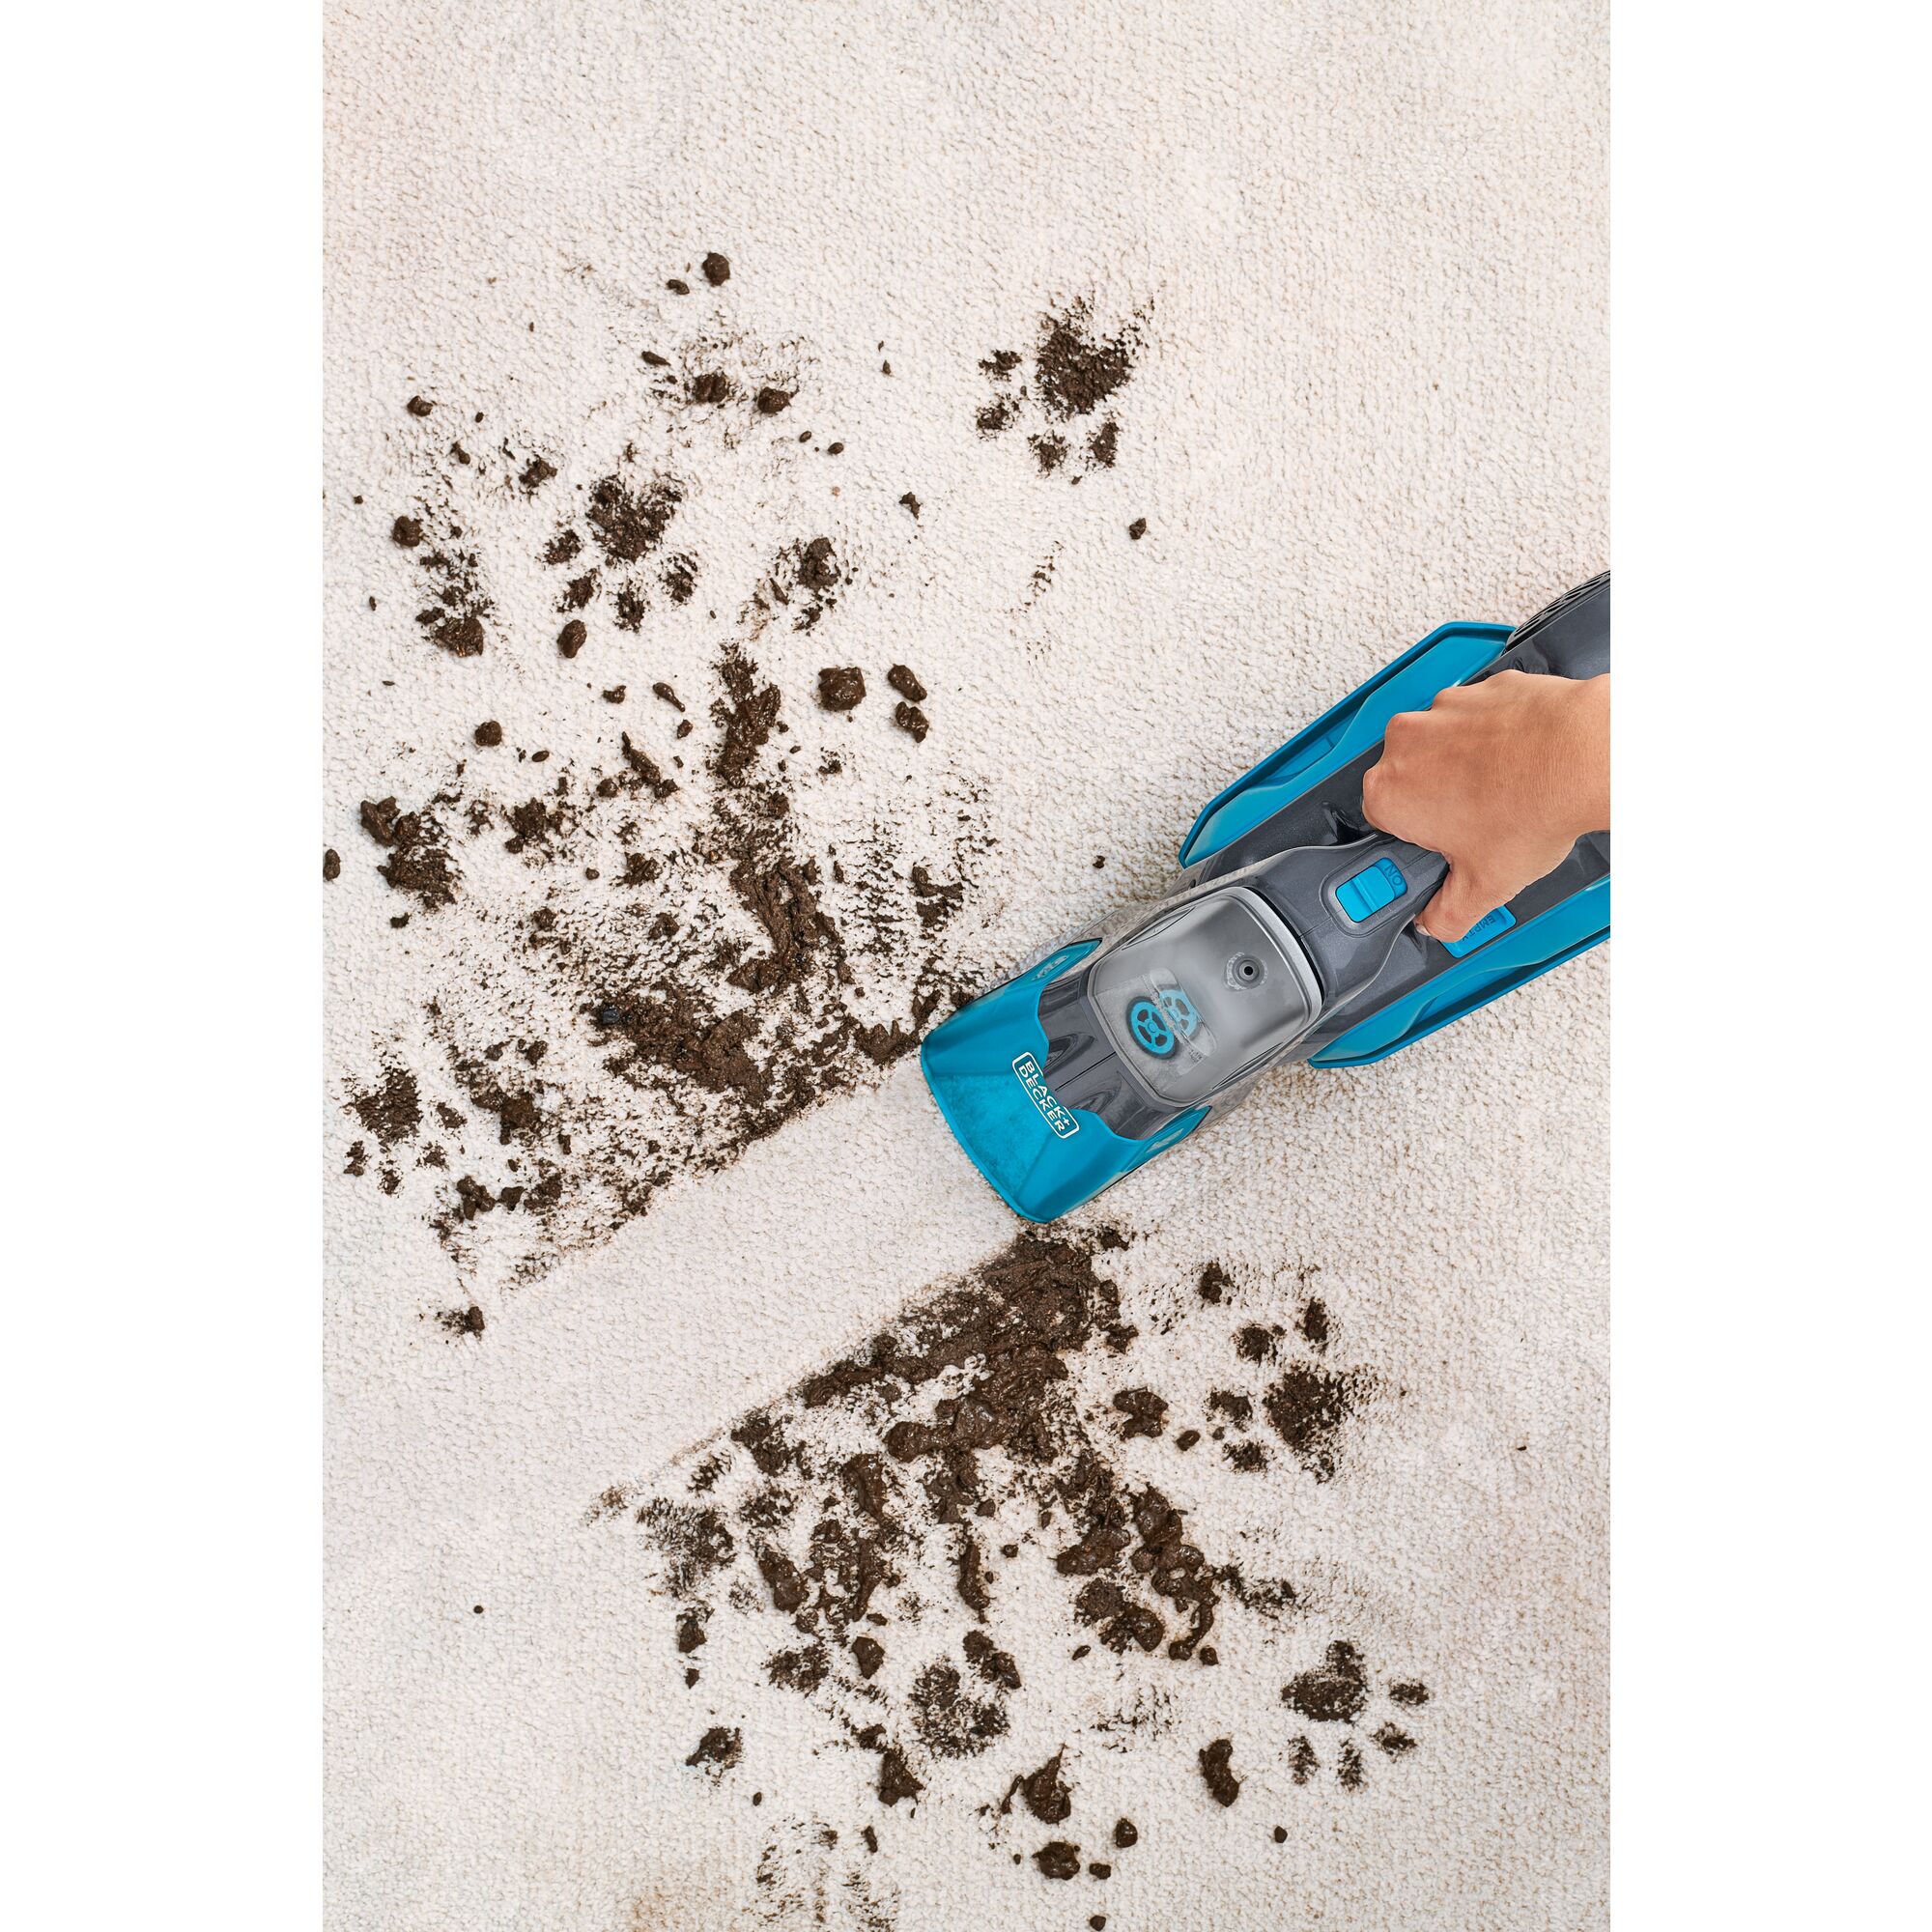 Spillbuster Cordless Spill plus Spot Cleaner being used for cleaning dirt from carpet.